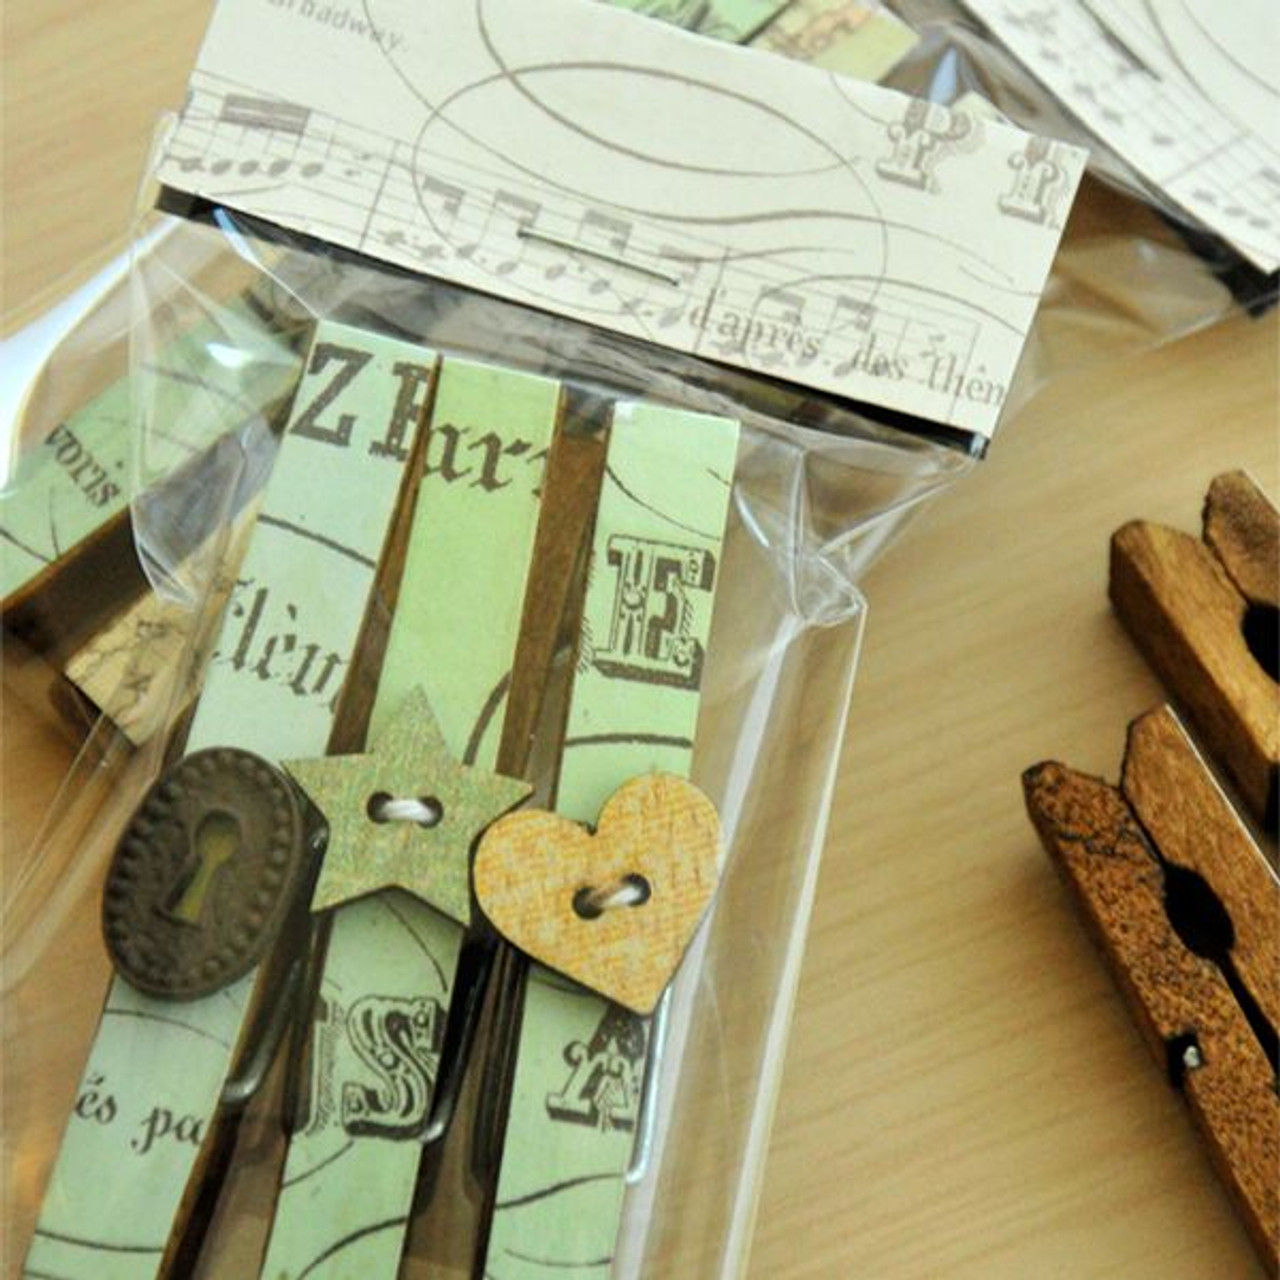 Altered Clothespins Gift Package Project - Stampington & Company